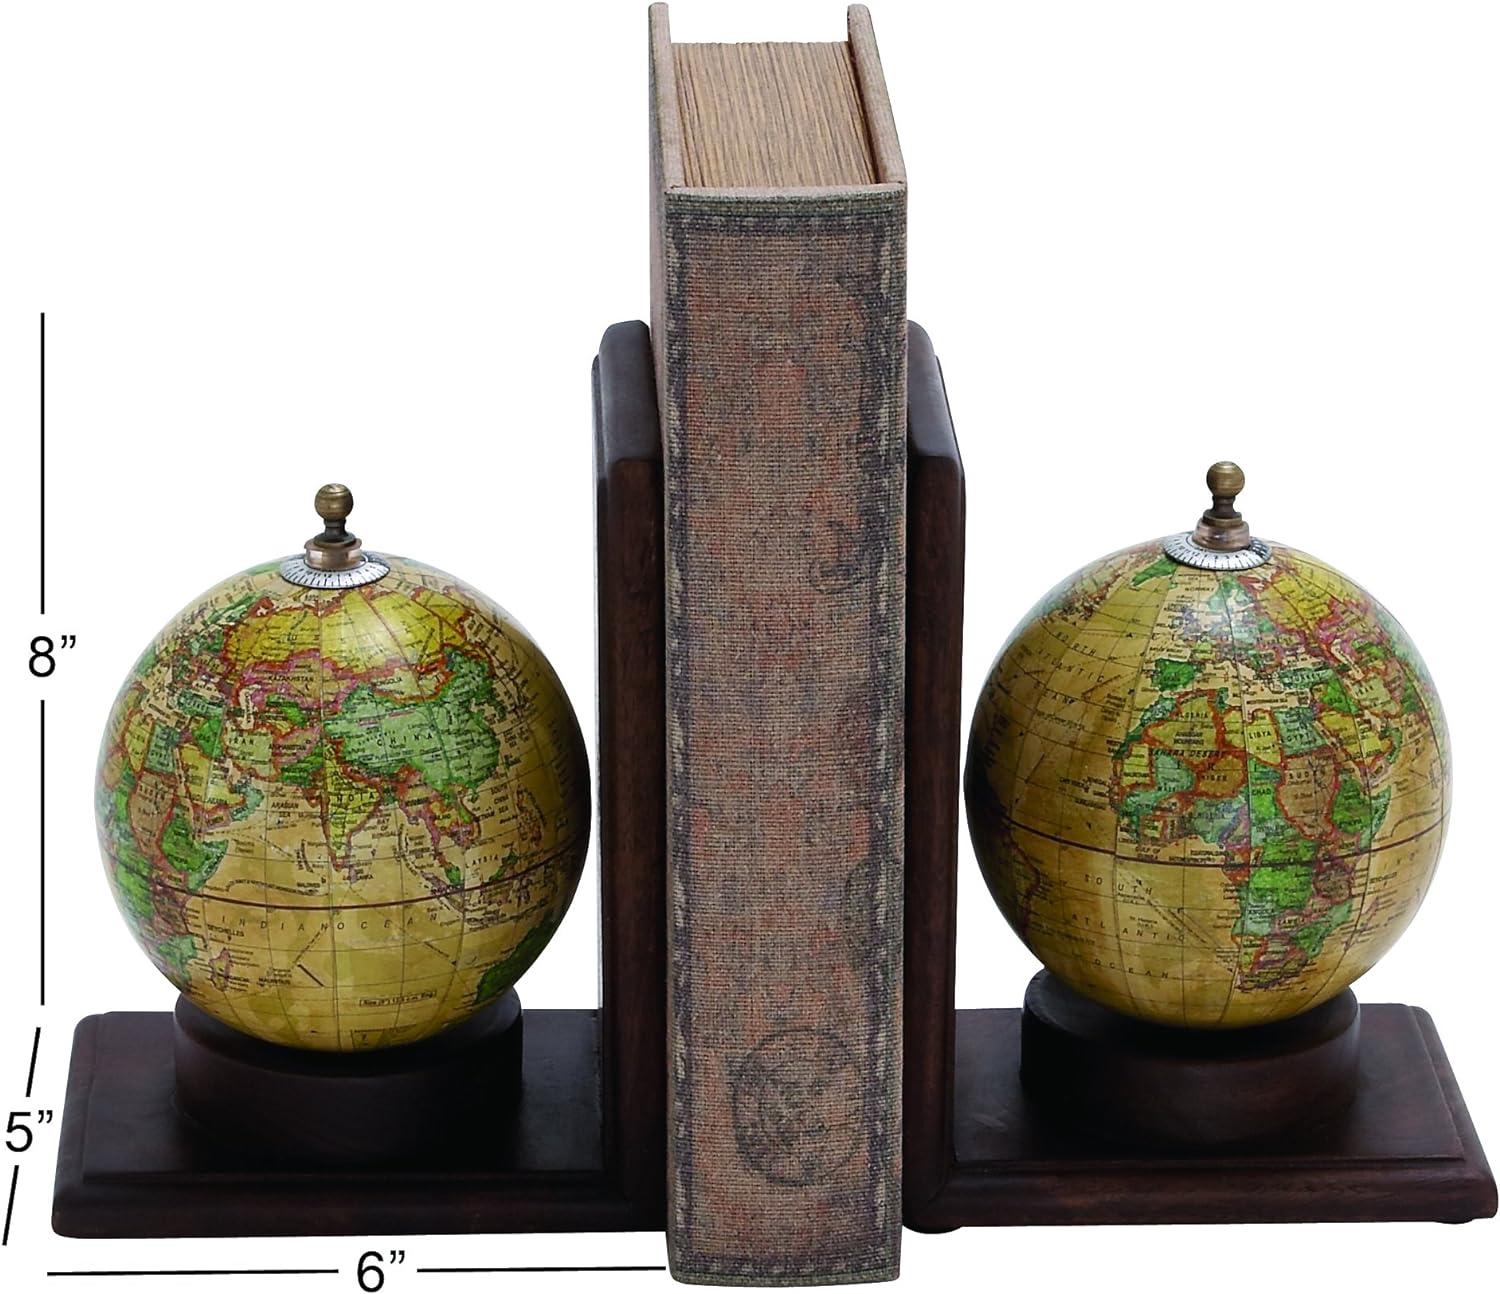 Elegant Sepia Globe Wooden Bookends with Metallic Accents, Set of 2